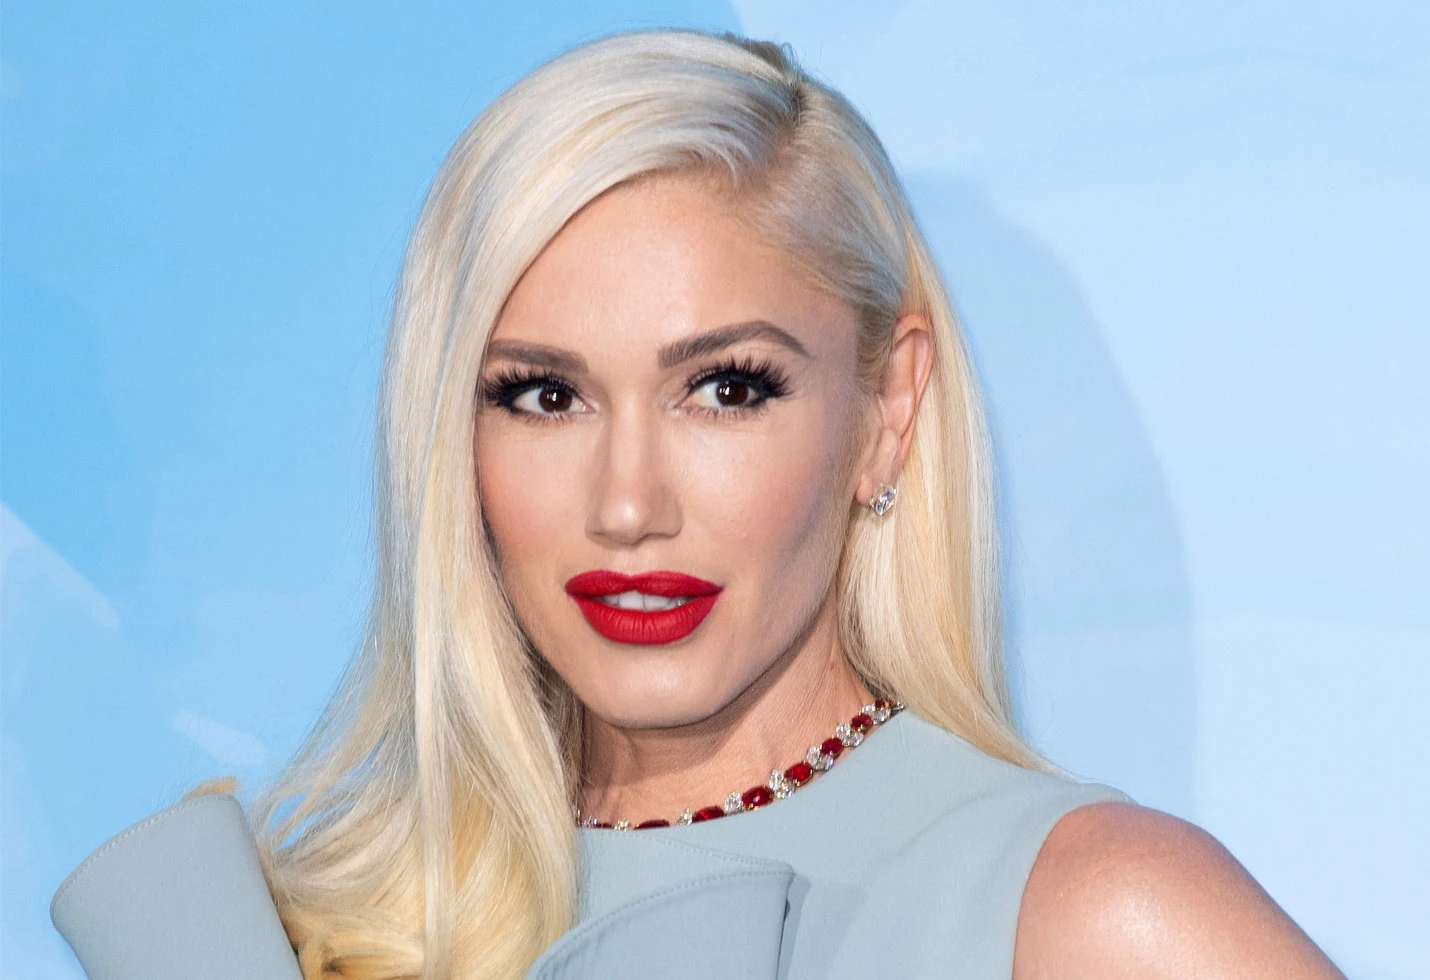 Is Gwen Stefani Aging Gracefully Or Has She Had Some Help? You Be The Judge!